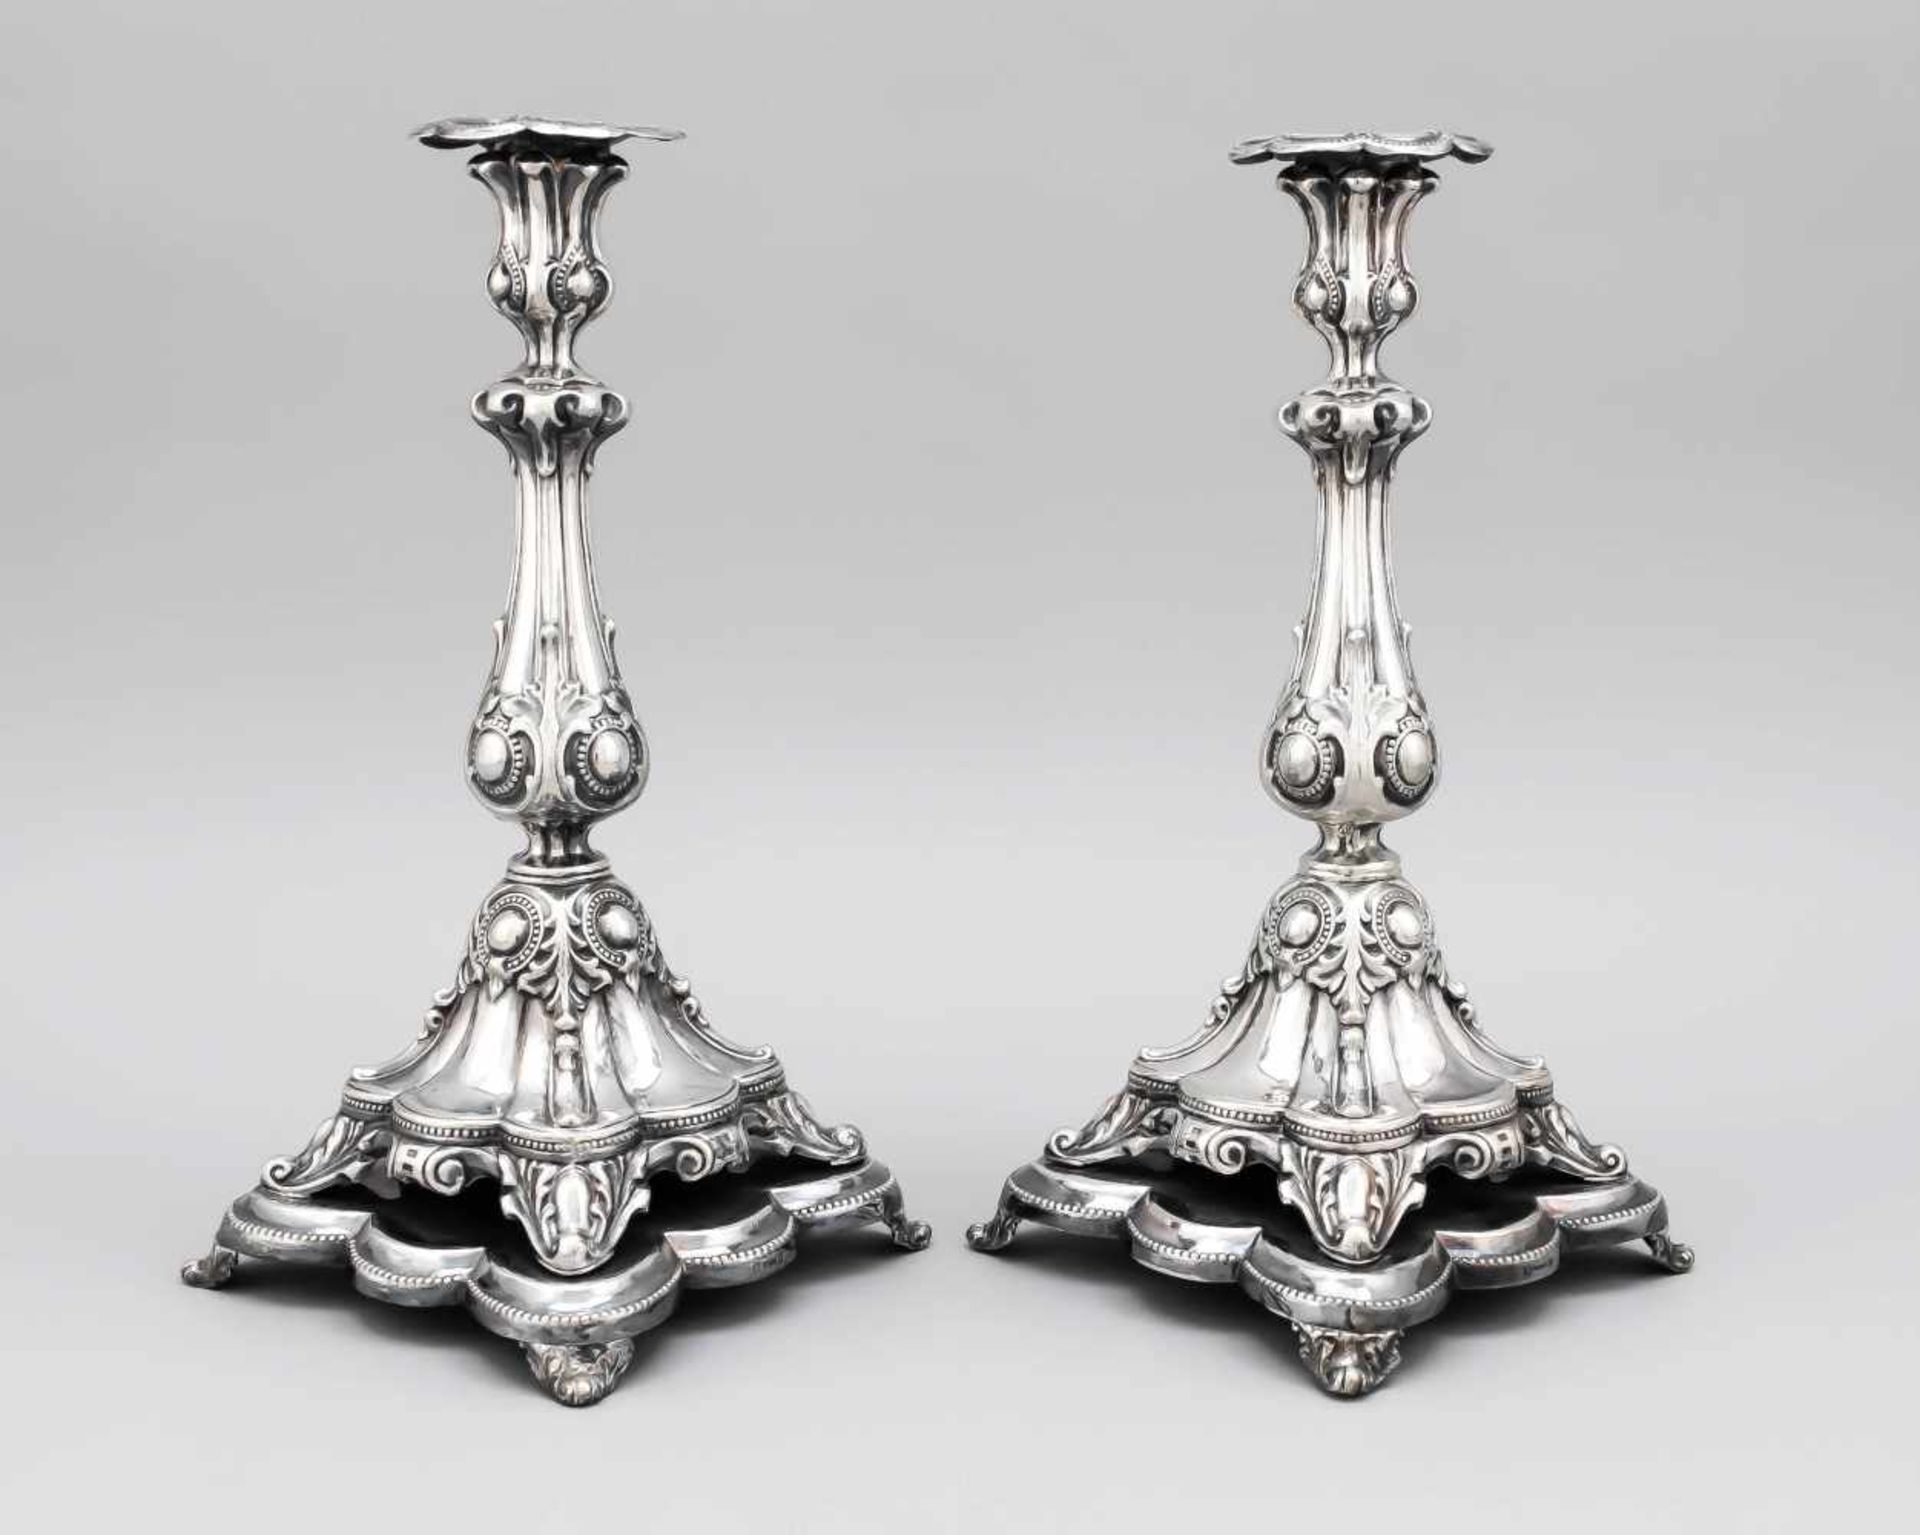 A pair of historicism candlesticks, presumably German, end of the 19th century, silver 12